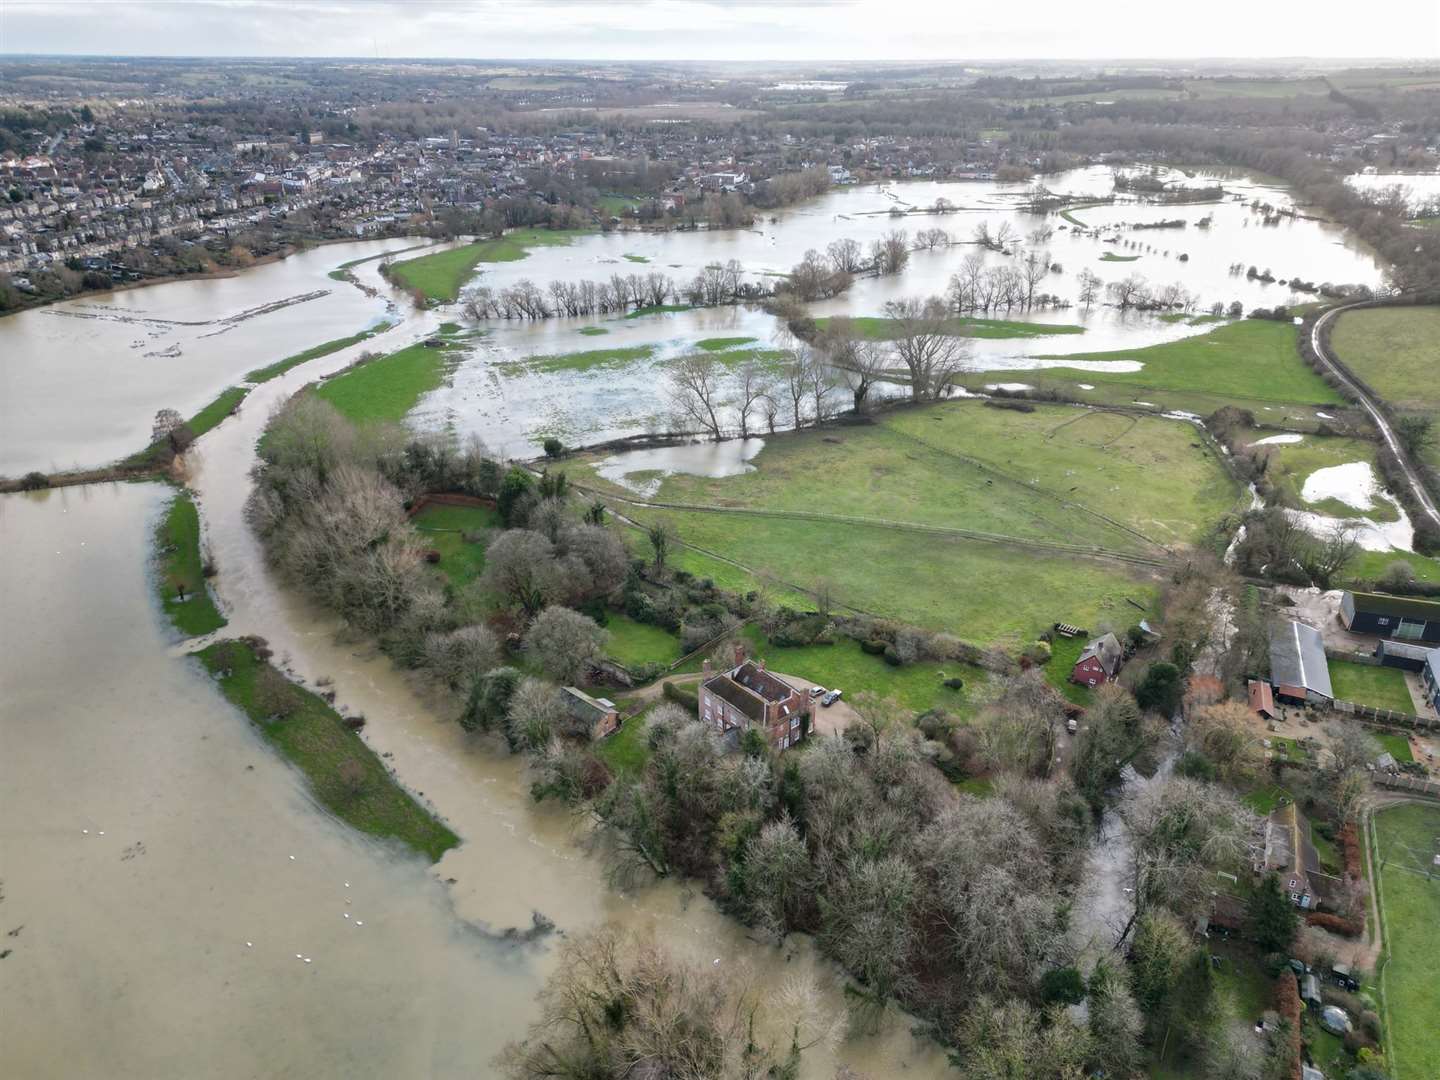 Photos show the overflowing River Stour between Sudbury and Long Melford. Picture: Andy Rushworth